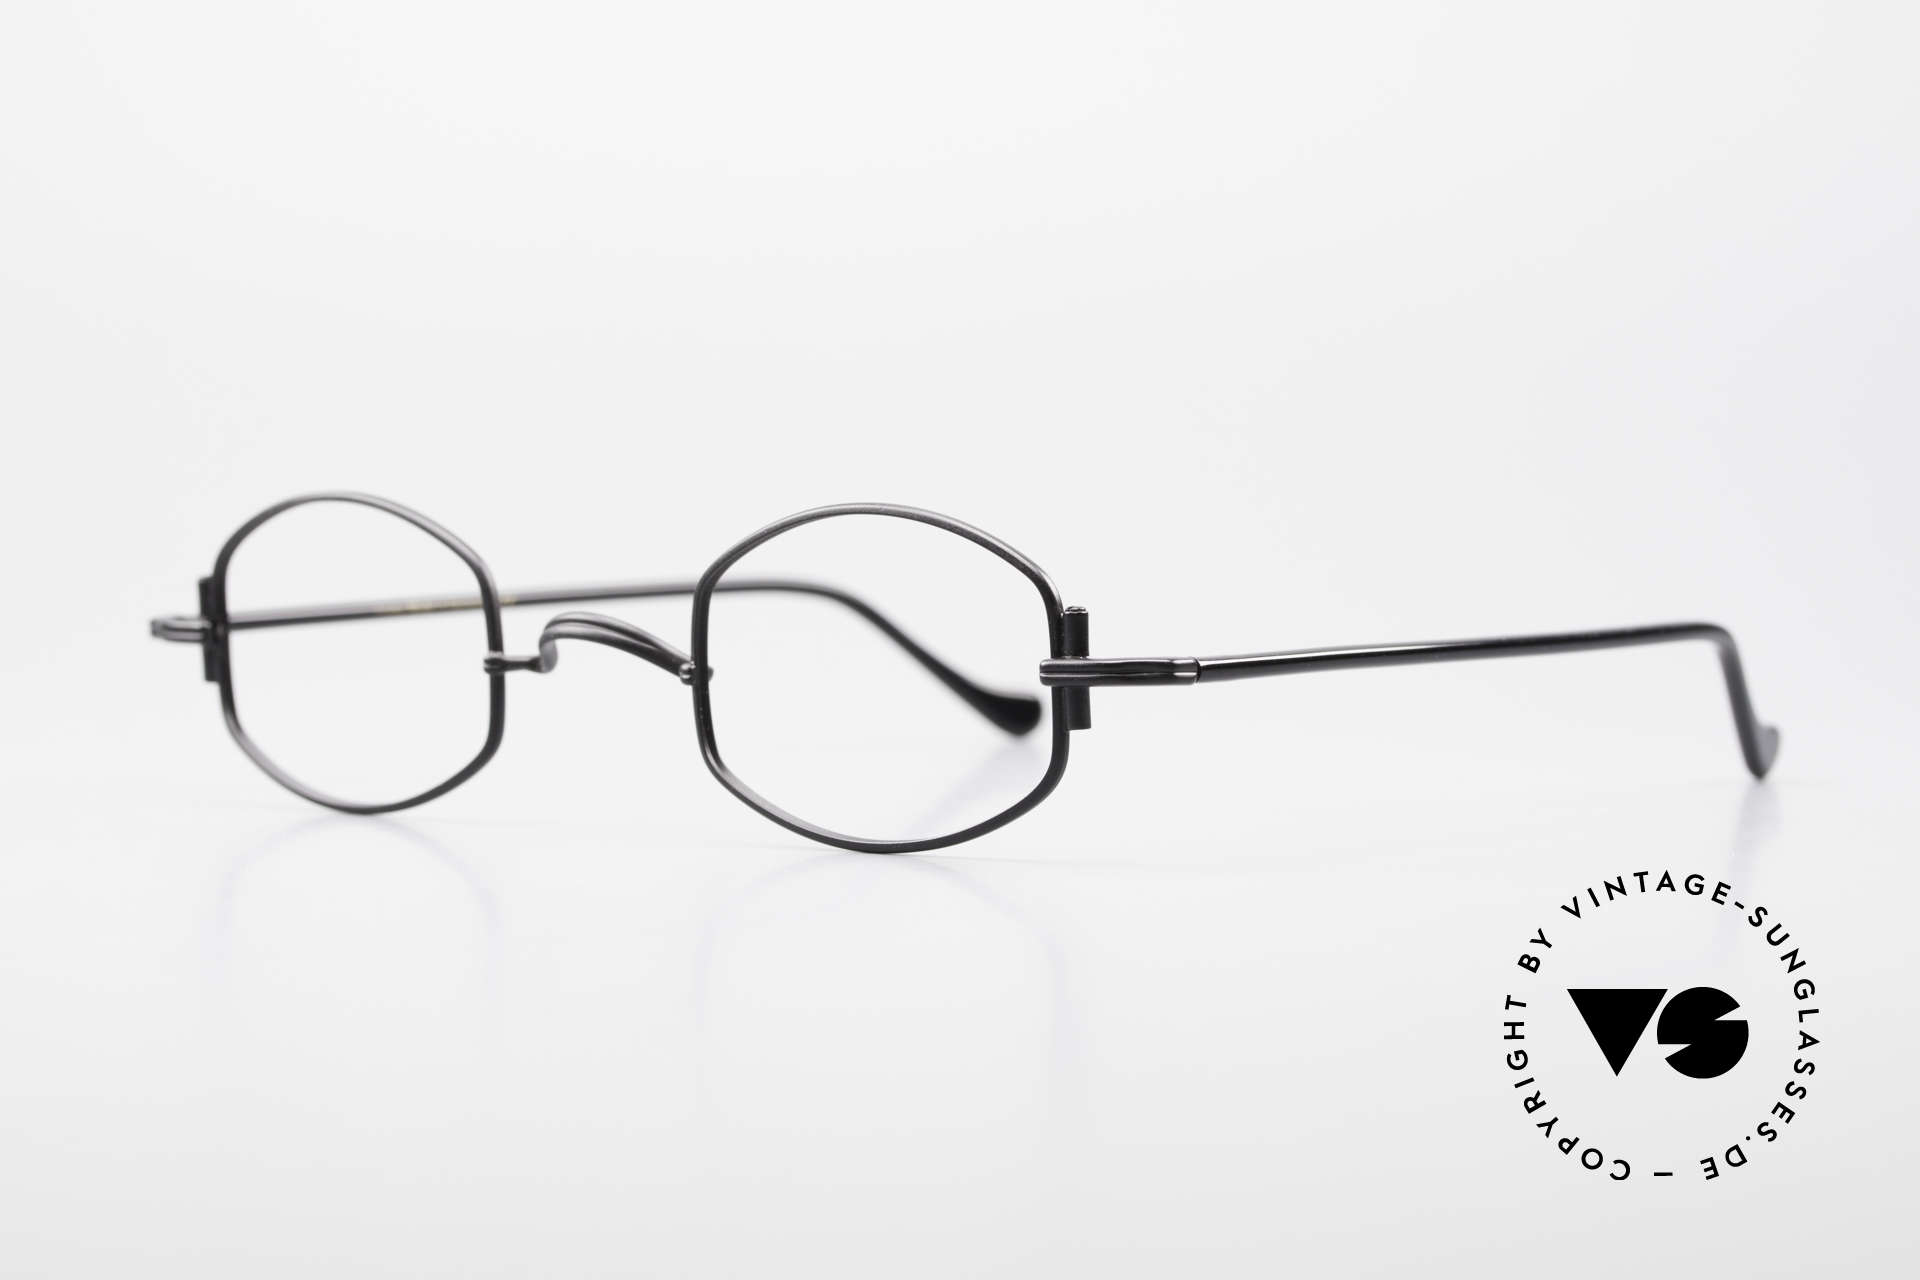 Lunor XA 03 Rare Old Eyewear Classic, well-known for the "W-bridge" & the plain frame designs, Made for Men and Women